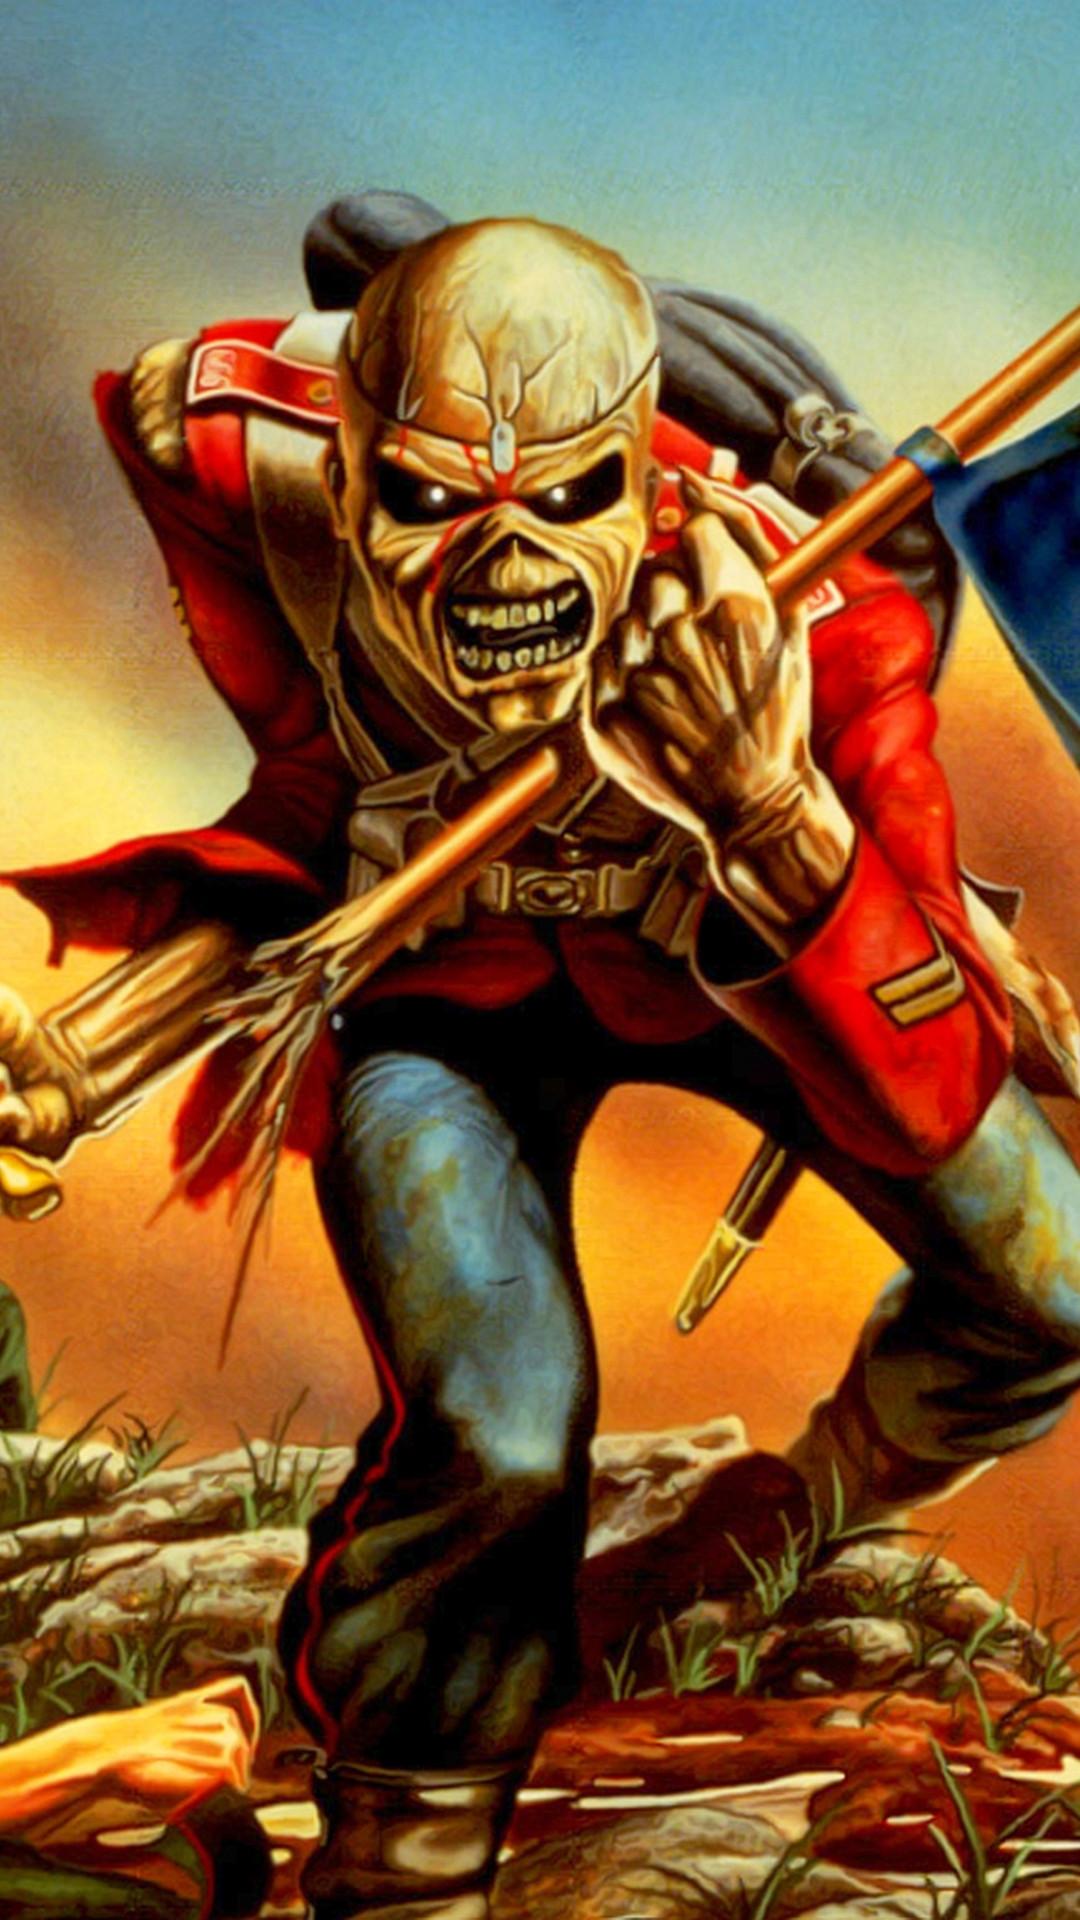 Iron Maiden Phone Wallpaper  Mobile Abyss